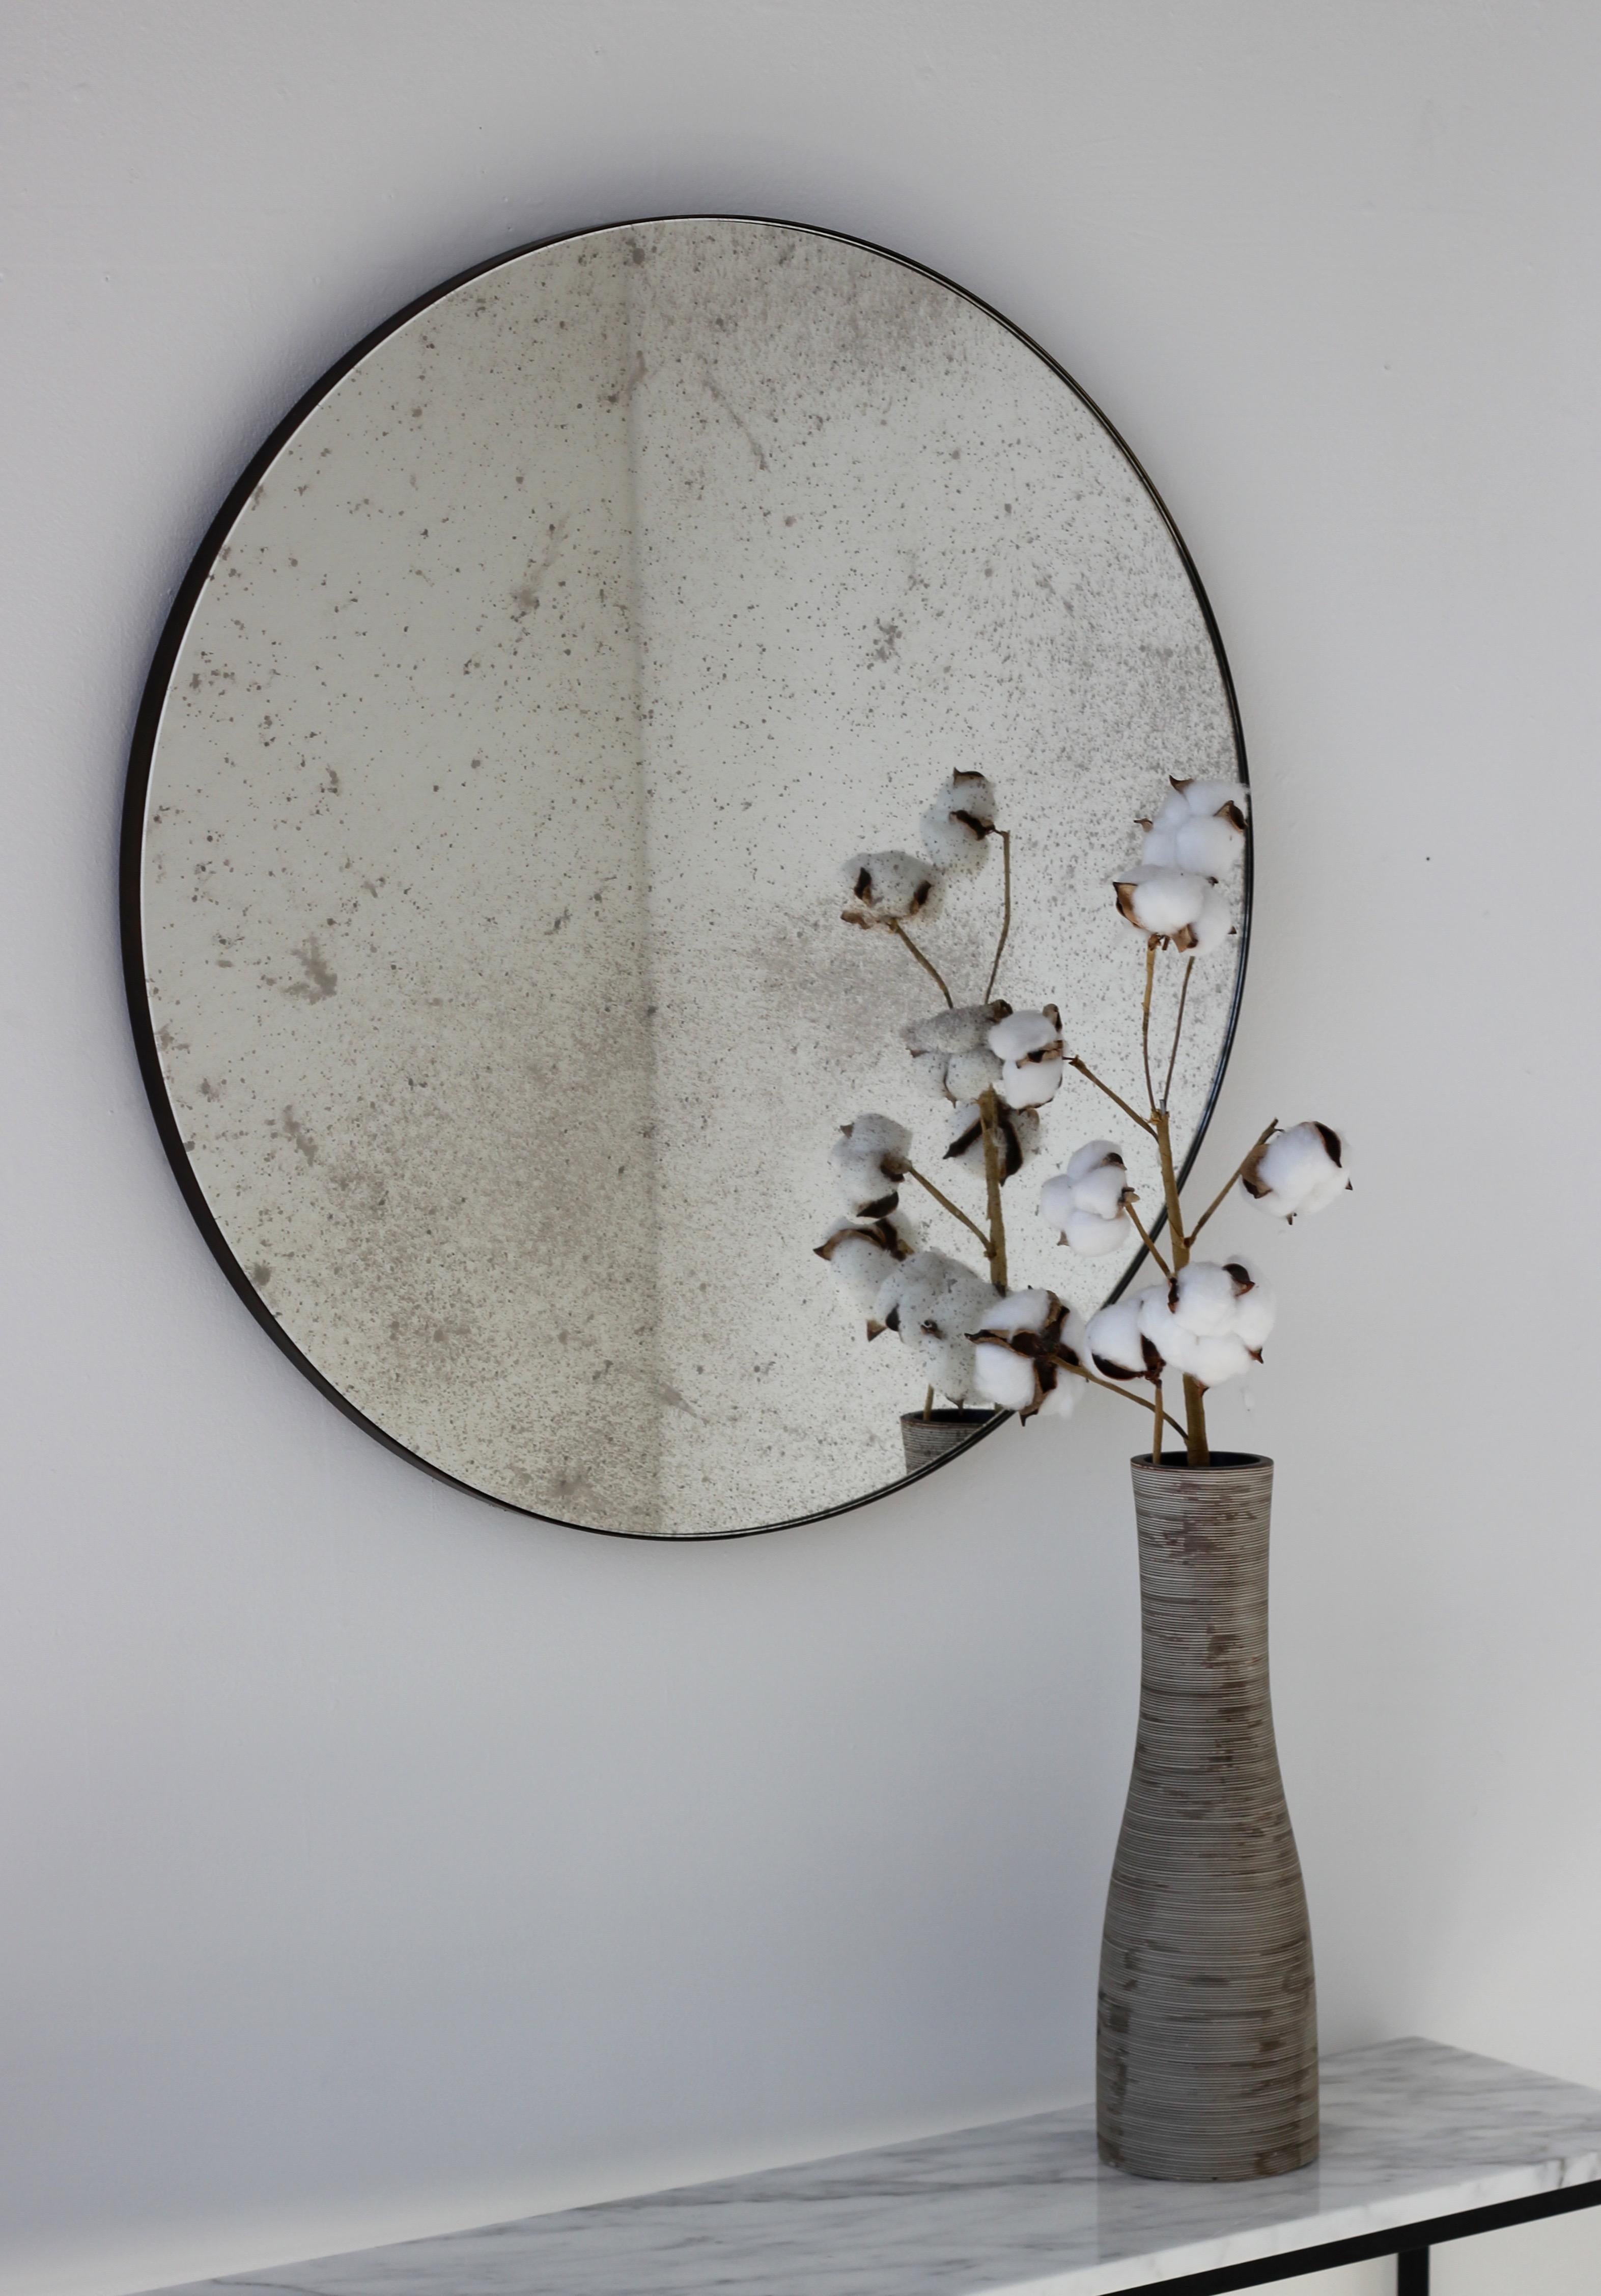 Delightful antiqued Orbis™ round mirror with a minimalist bronze patina brass frame. Designed and handcrafted in London, UK.

Our mirrors are designed with an integrated French cleat (split batten) system that ensures the mirror is securely mounted